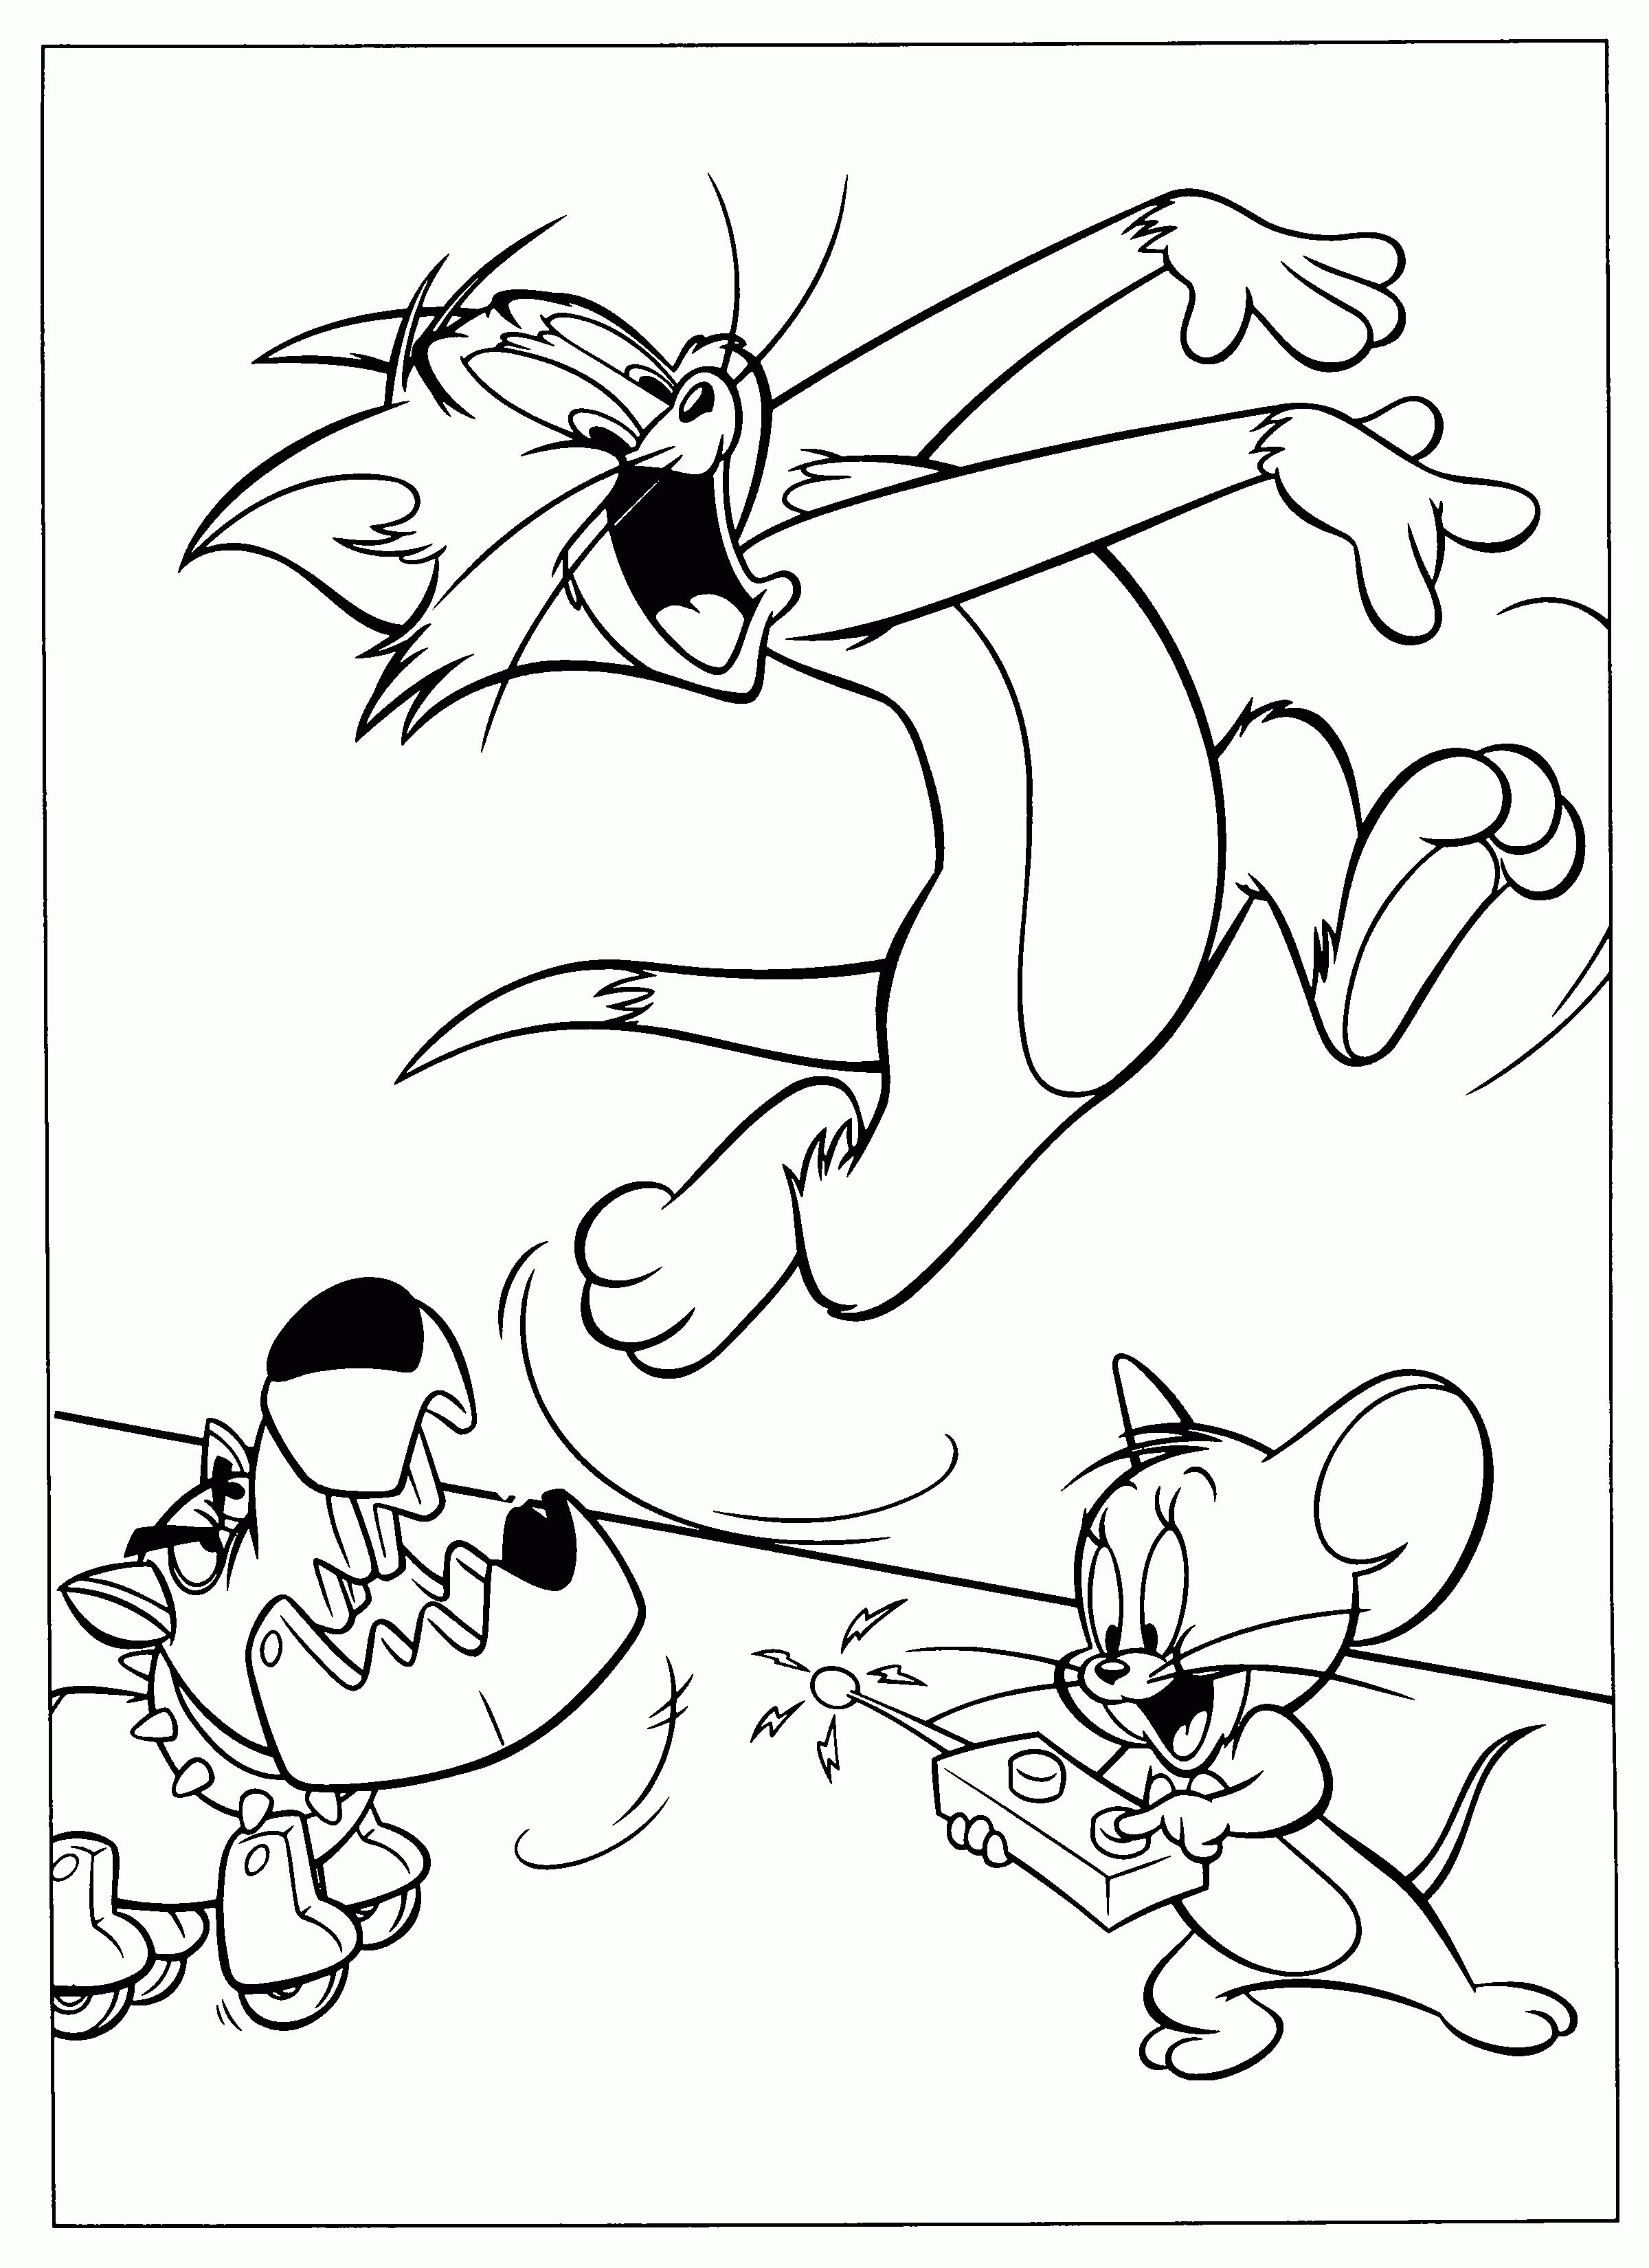 Colour Cartoon Tom And Jerry | Coloring Pages | Coloring Pages - Free Printable Tom And Jerry Coloring Pages